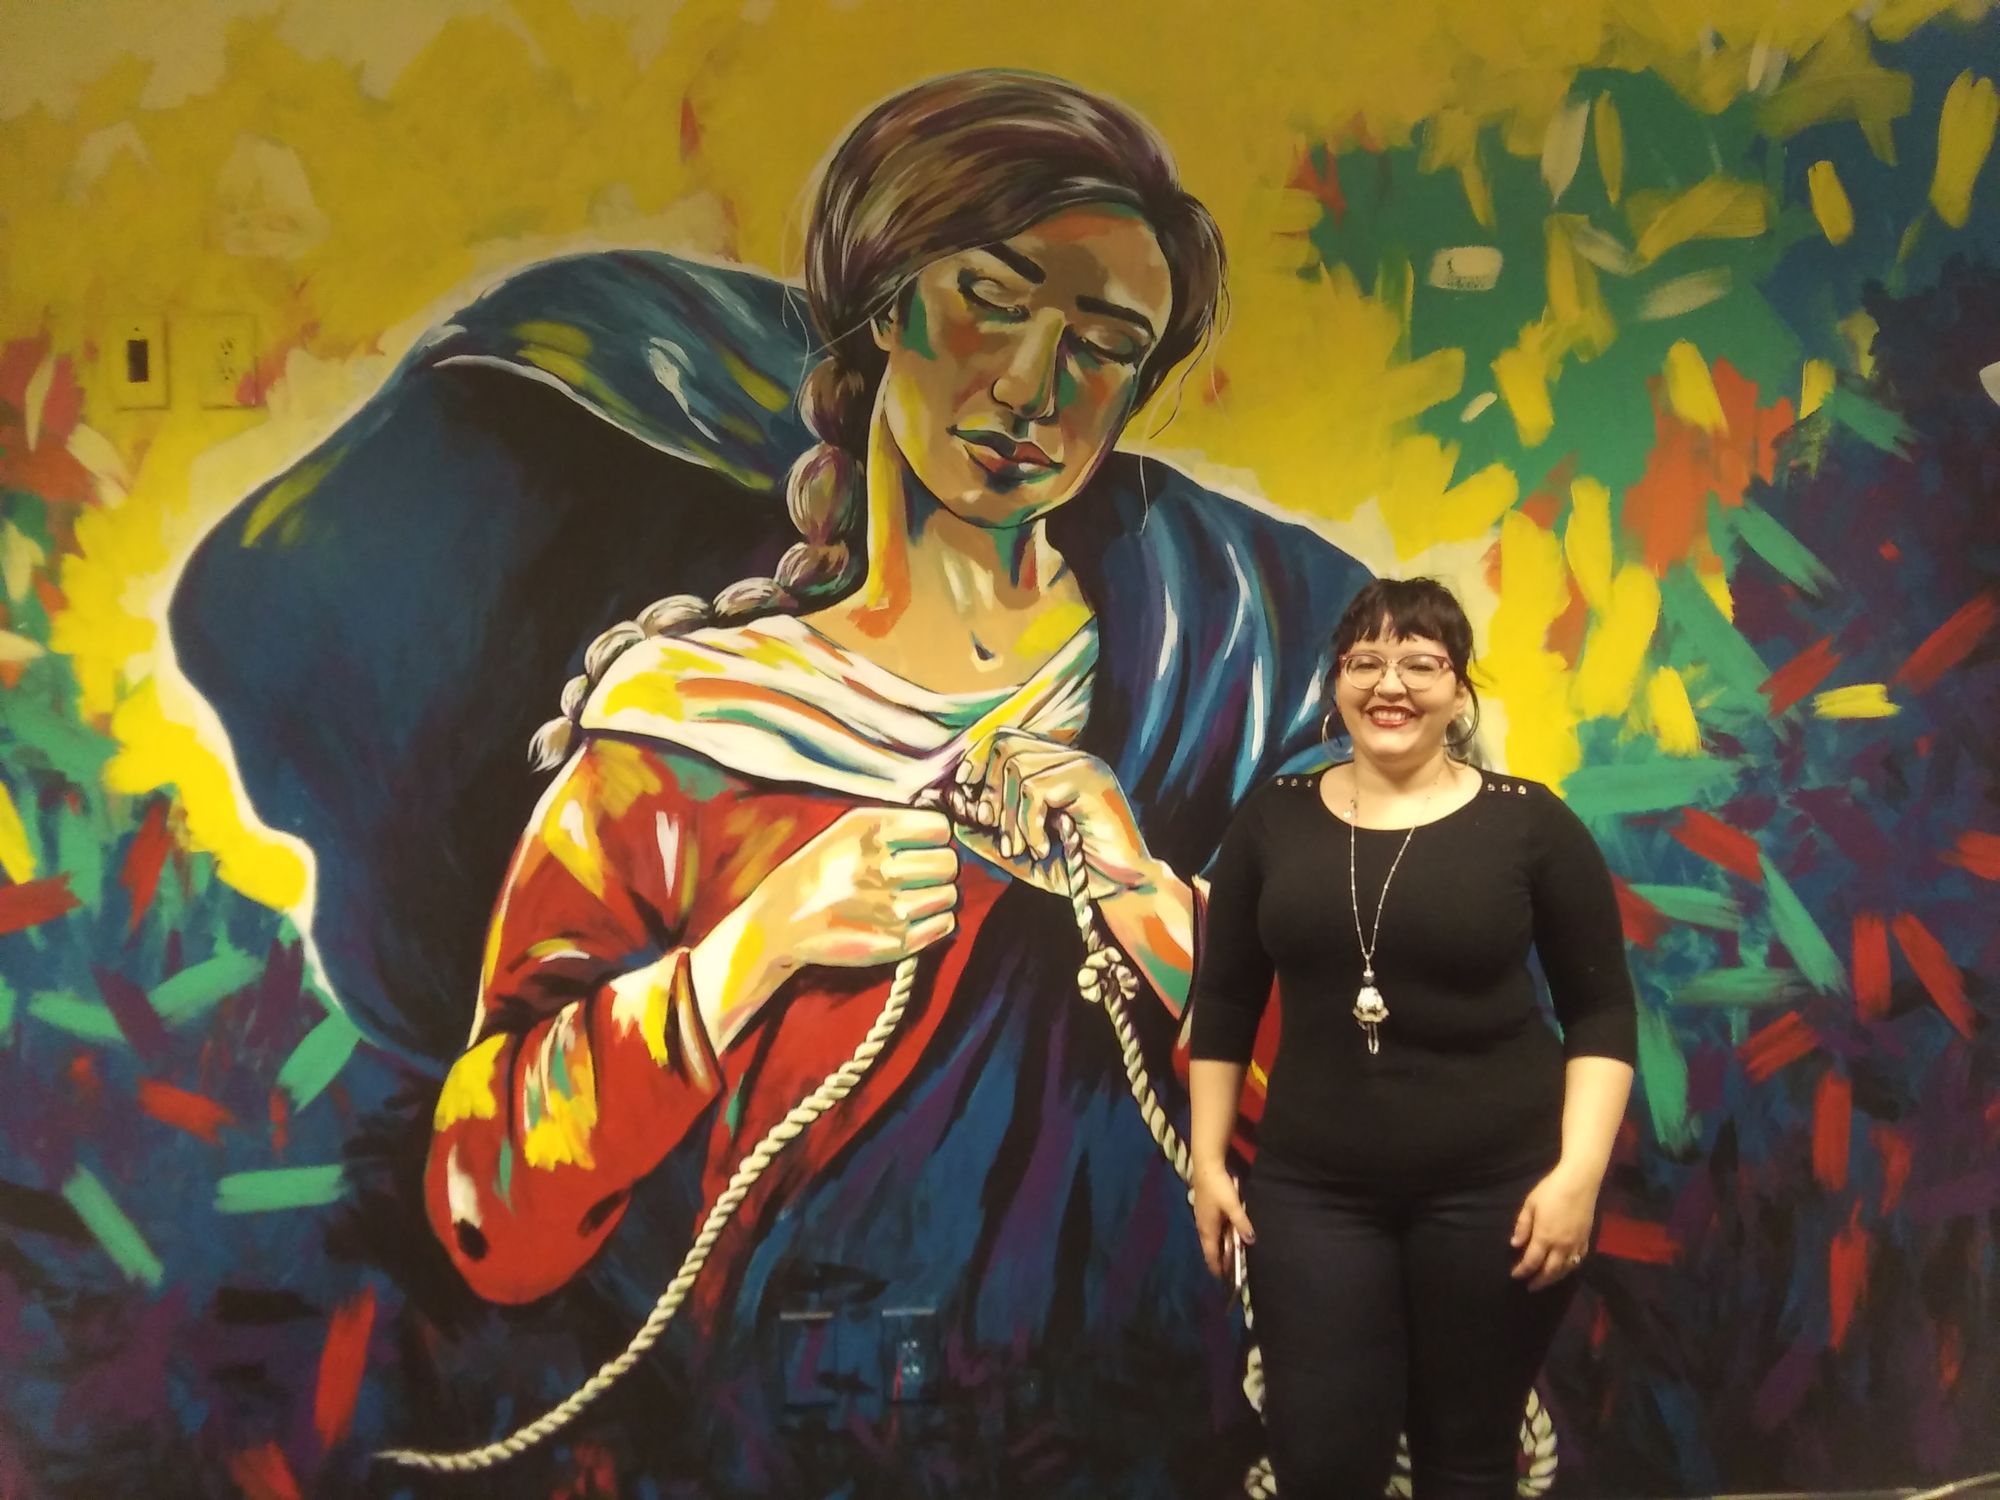 Local artist paints free hand mural on campus